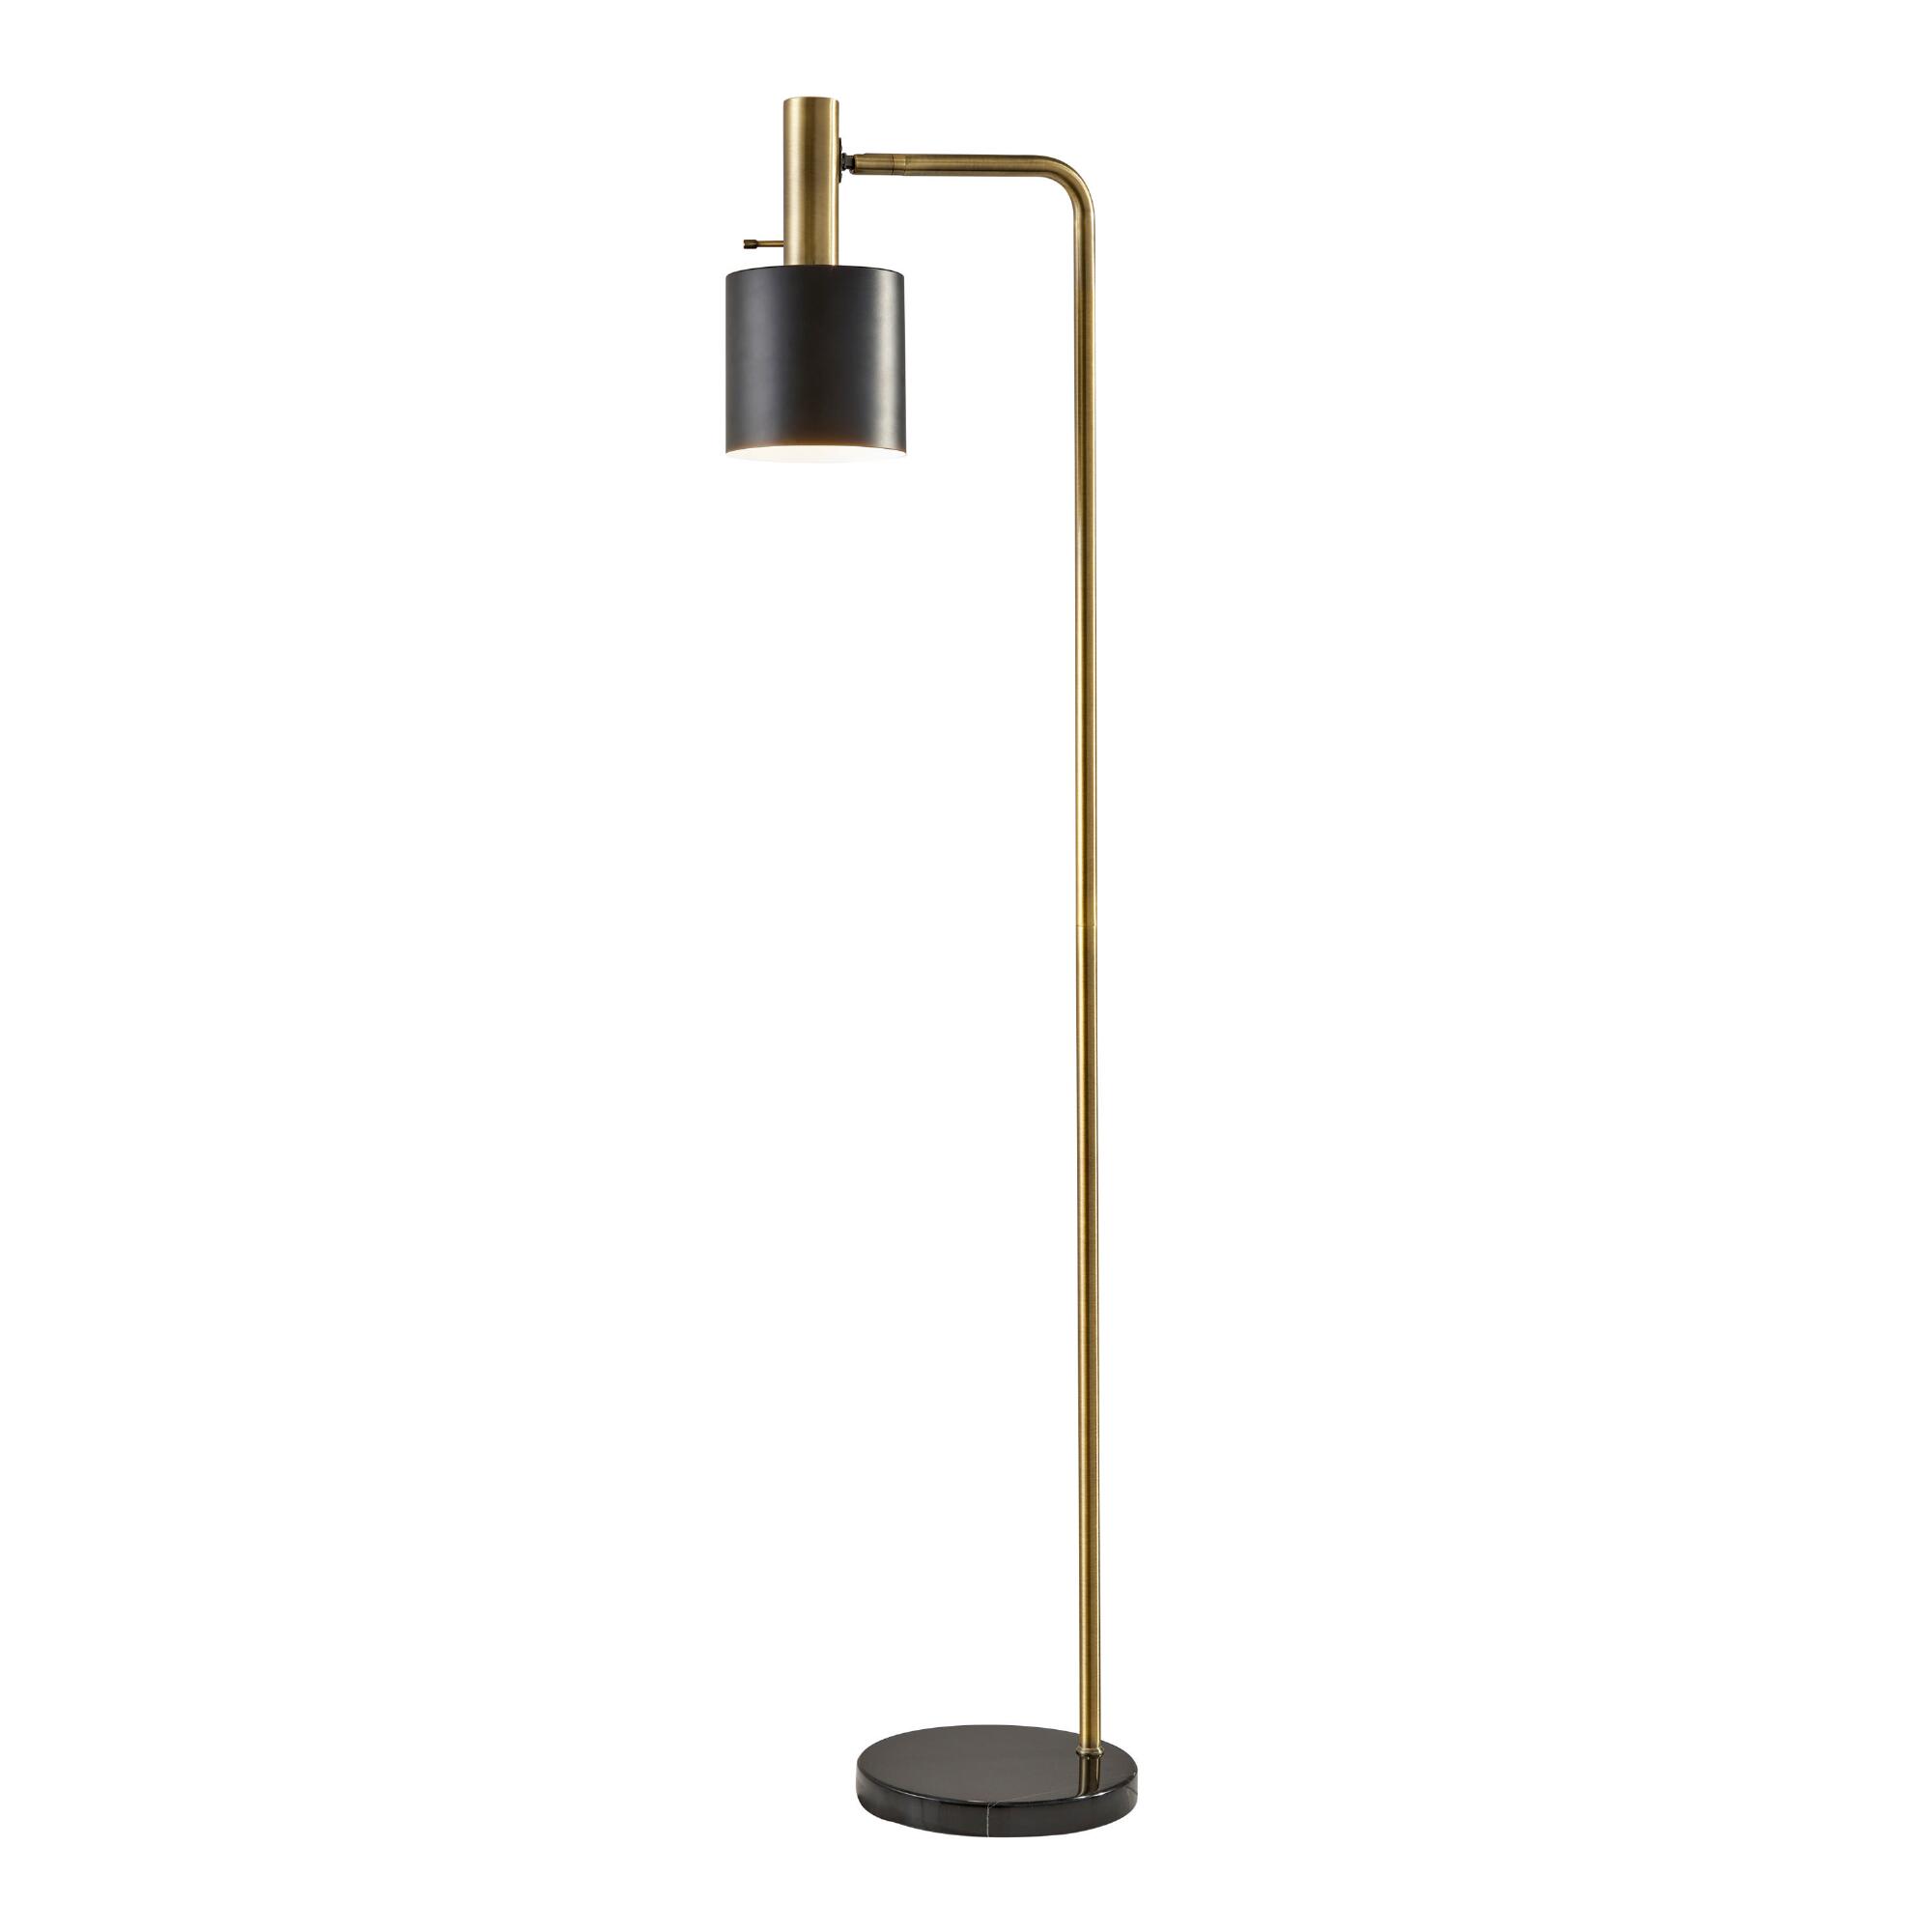 Marble and Steel Adjustable Martin Floor Lamp by World Market